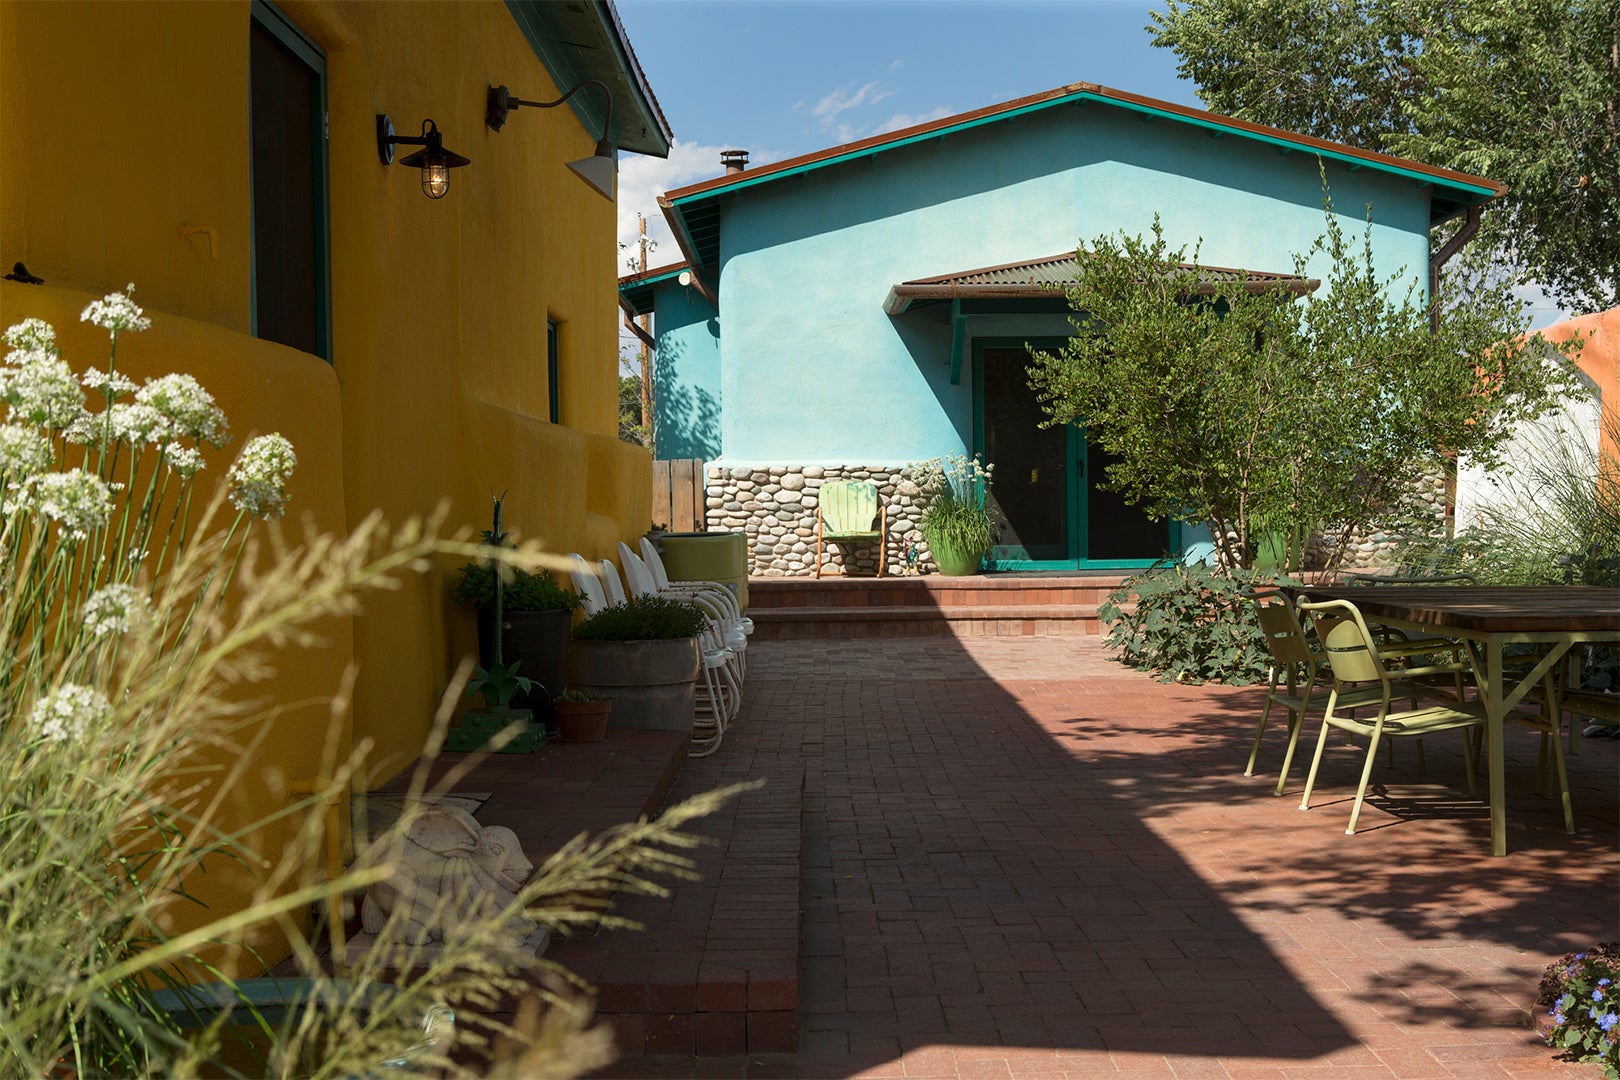 yellow and turquoise home exteriors with brick patio